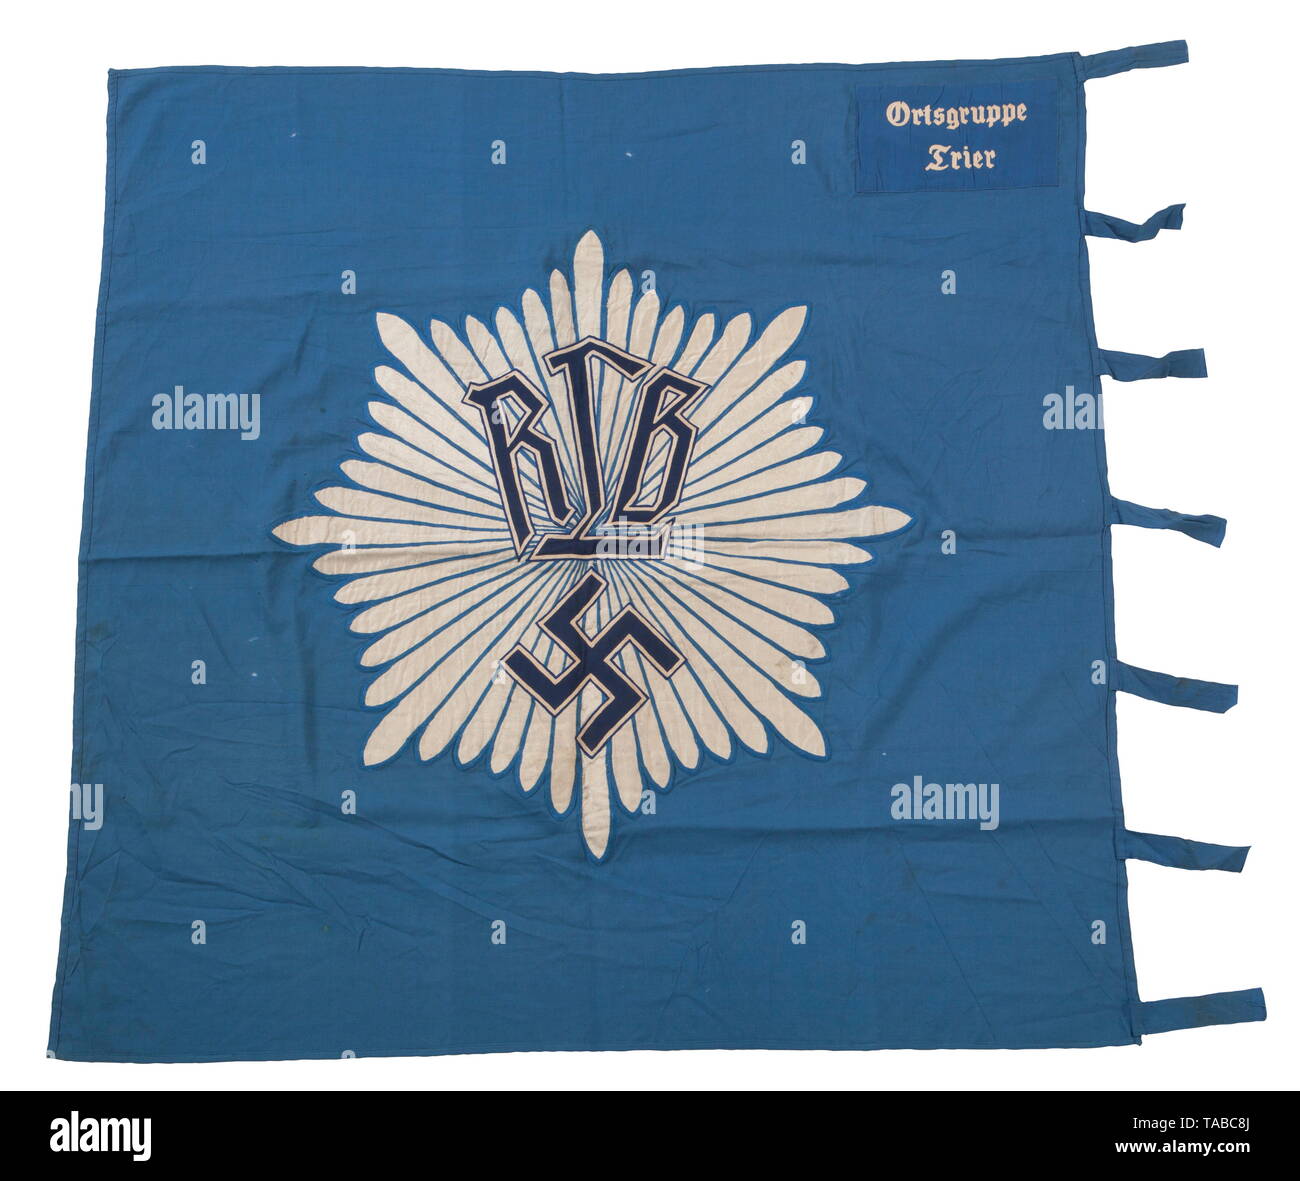 An RLB unit flag, 1st pattern Double-sided, multi-piece, blue cotton construction. Navy blue cotton 'RLB' and swastika superimposed over chain stitched applied woven silver flat wire starburst rays mounted. Blue wool corner panel with white chain stitched 'Ortsgruppe Trier'. Seven cloth attachment straps. Small holes and light staining. Approximately 120 x 120 cm. USA-lot, see page 4. historic, historical, Reichsluftschutzbund, State Air Protection Corps, organisation, organization, organizations, organisations, NS, National Socialism, Nazism, Third Reich, German Reich, Ger, Editorial-Use-Only Stock Photo